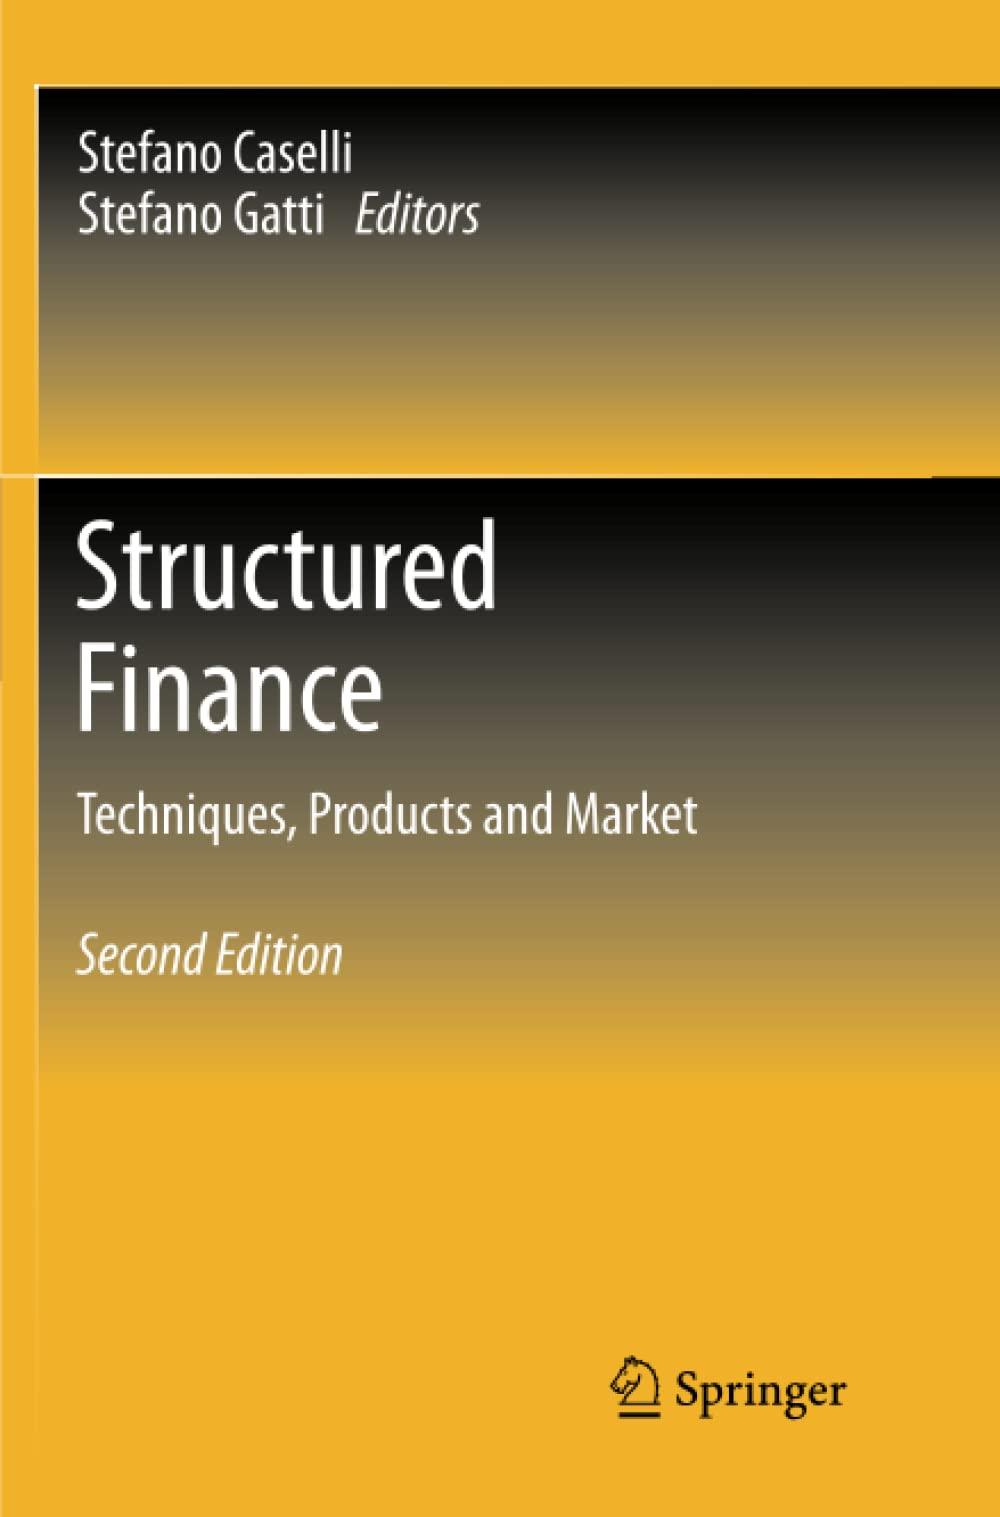 structured finance techniques products and market 2nd edition stefano caselli, stefano gatti 3319853244,